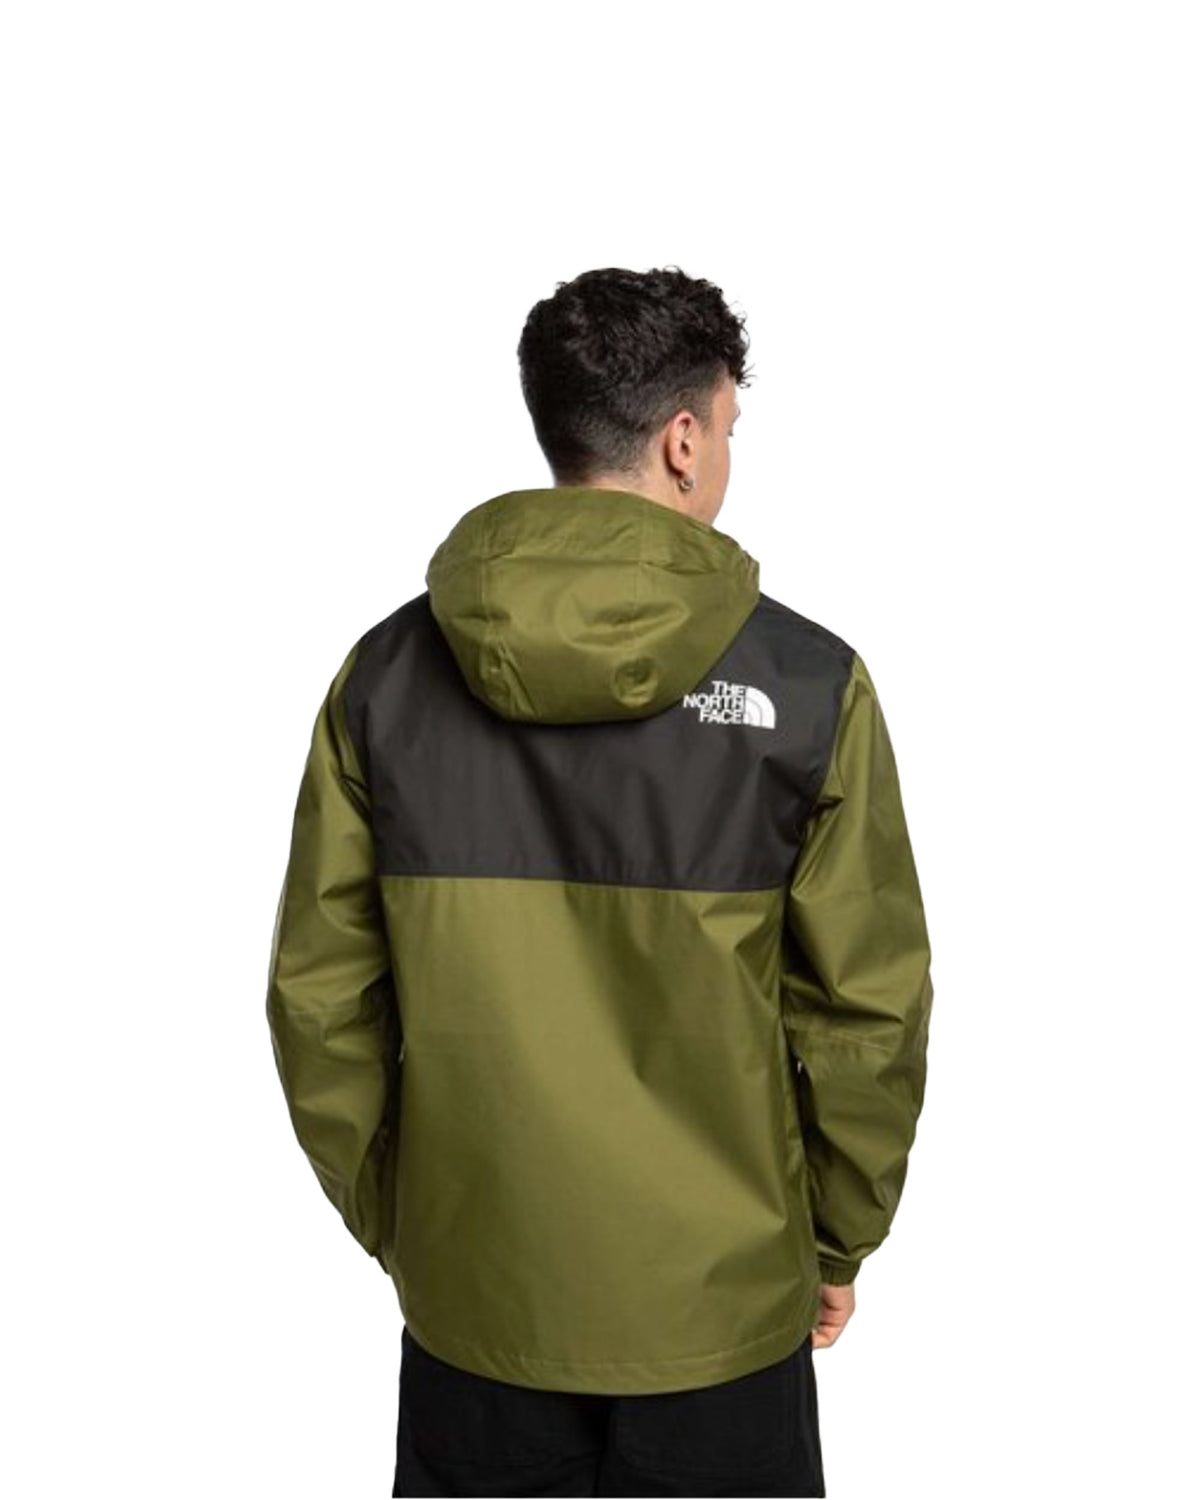 The North Face Mountain Q Jacket Forest Olive